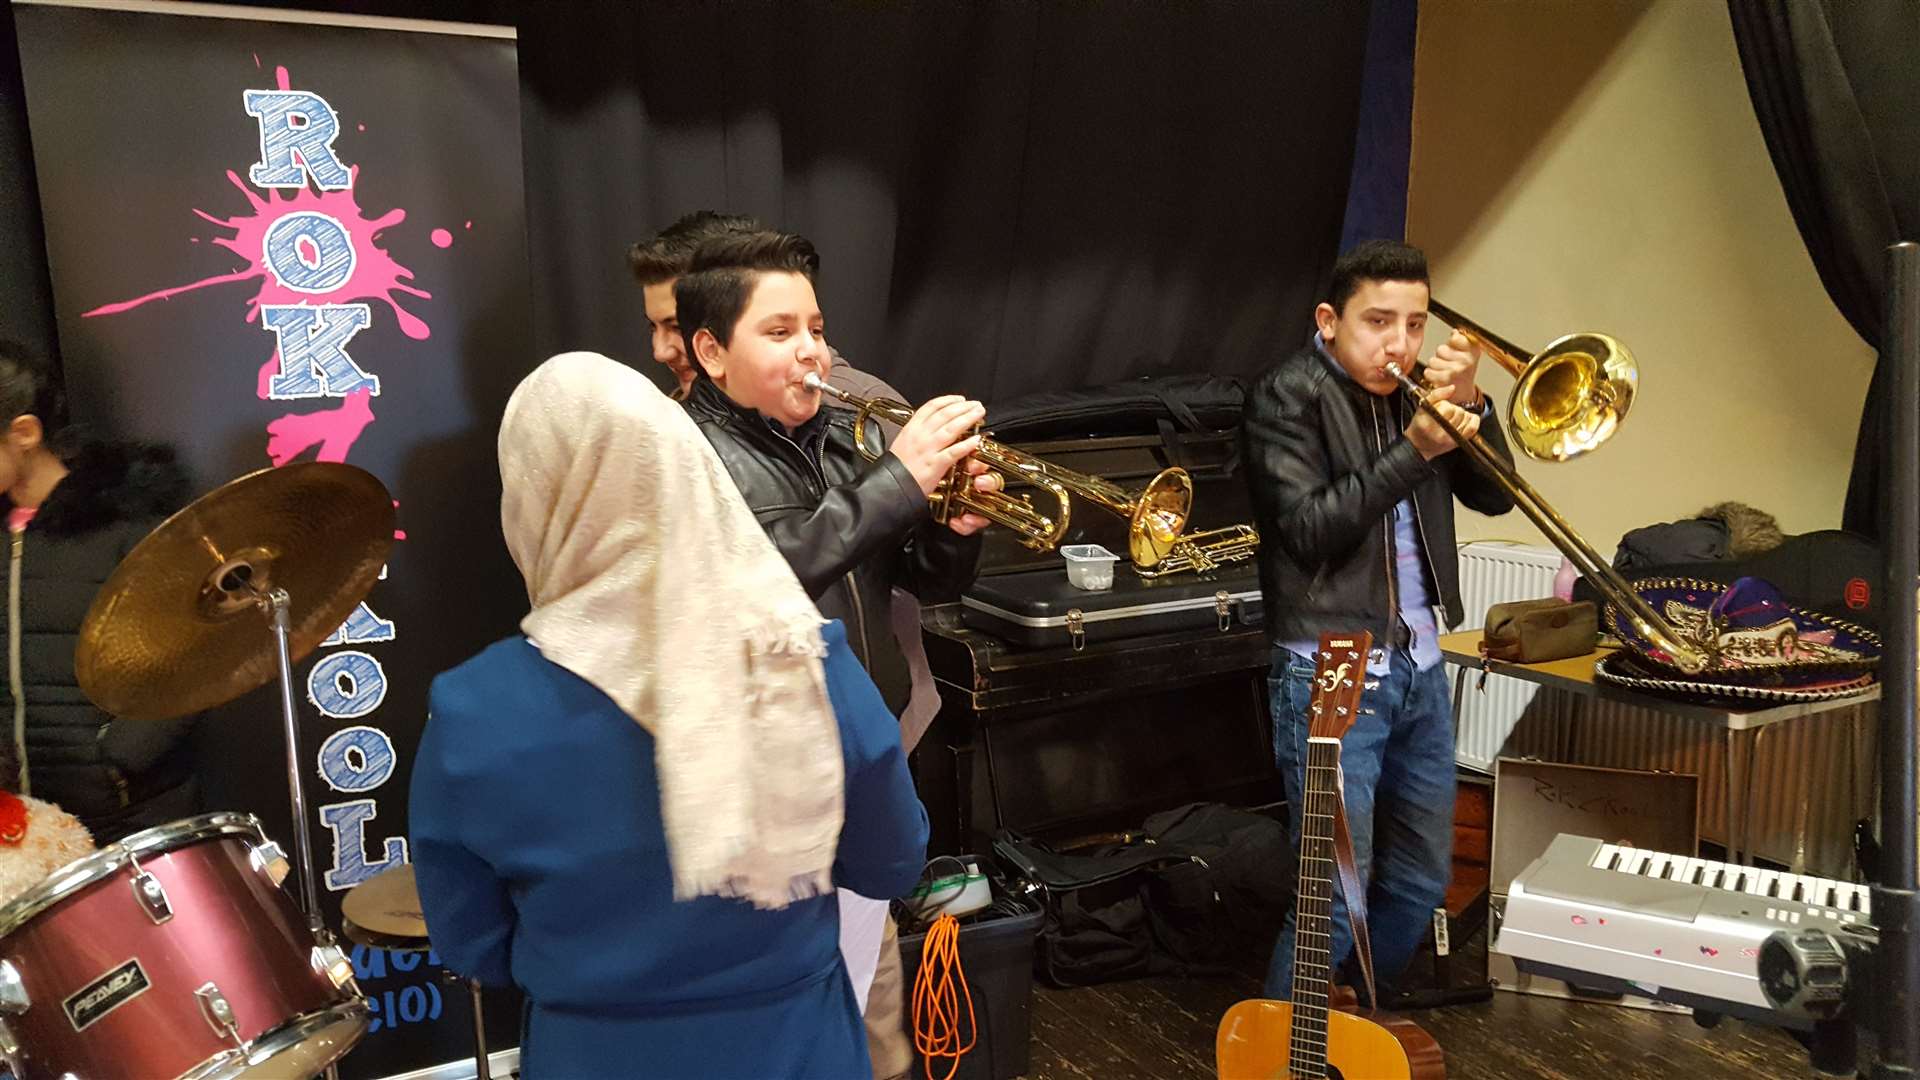 Syrians who attended the music session organised by RoKzKool Academy in Beauly.